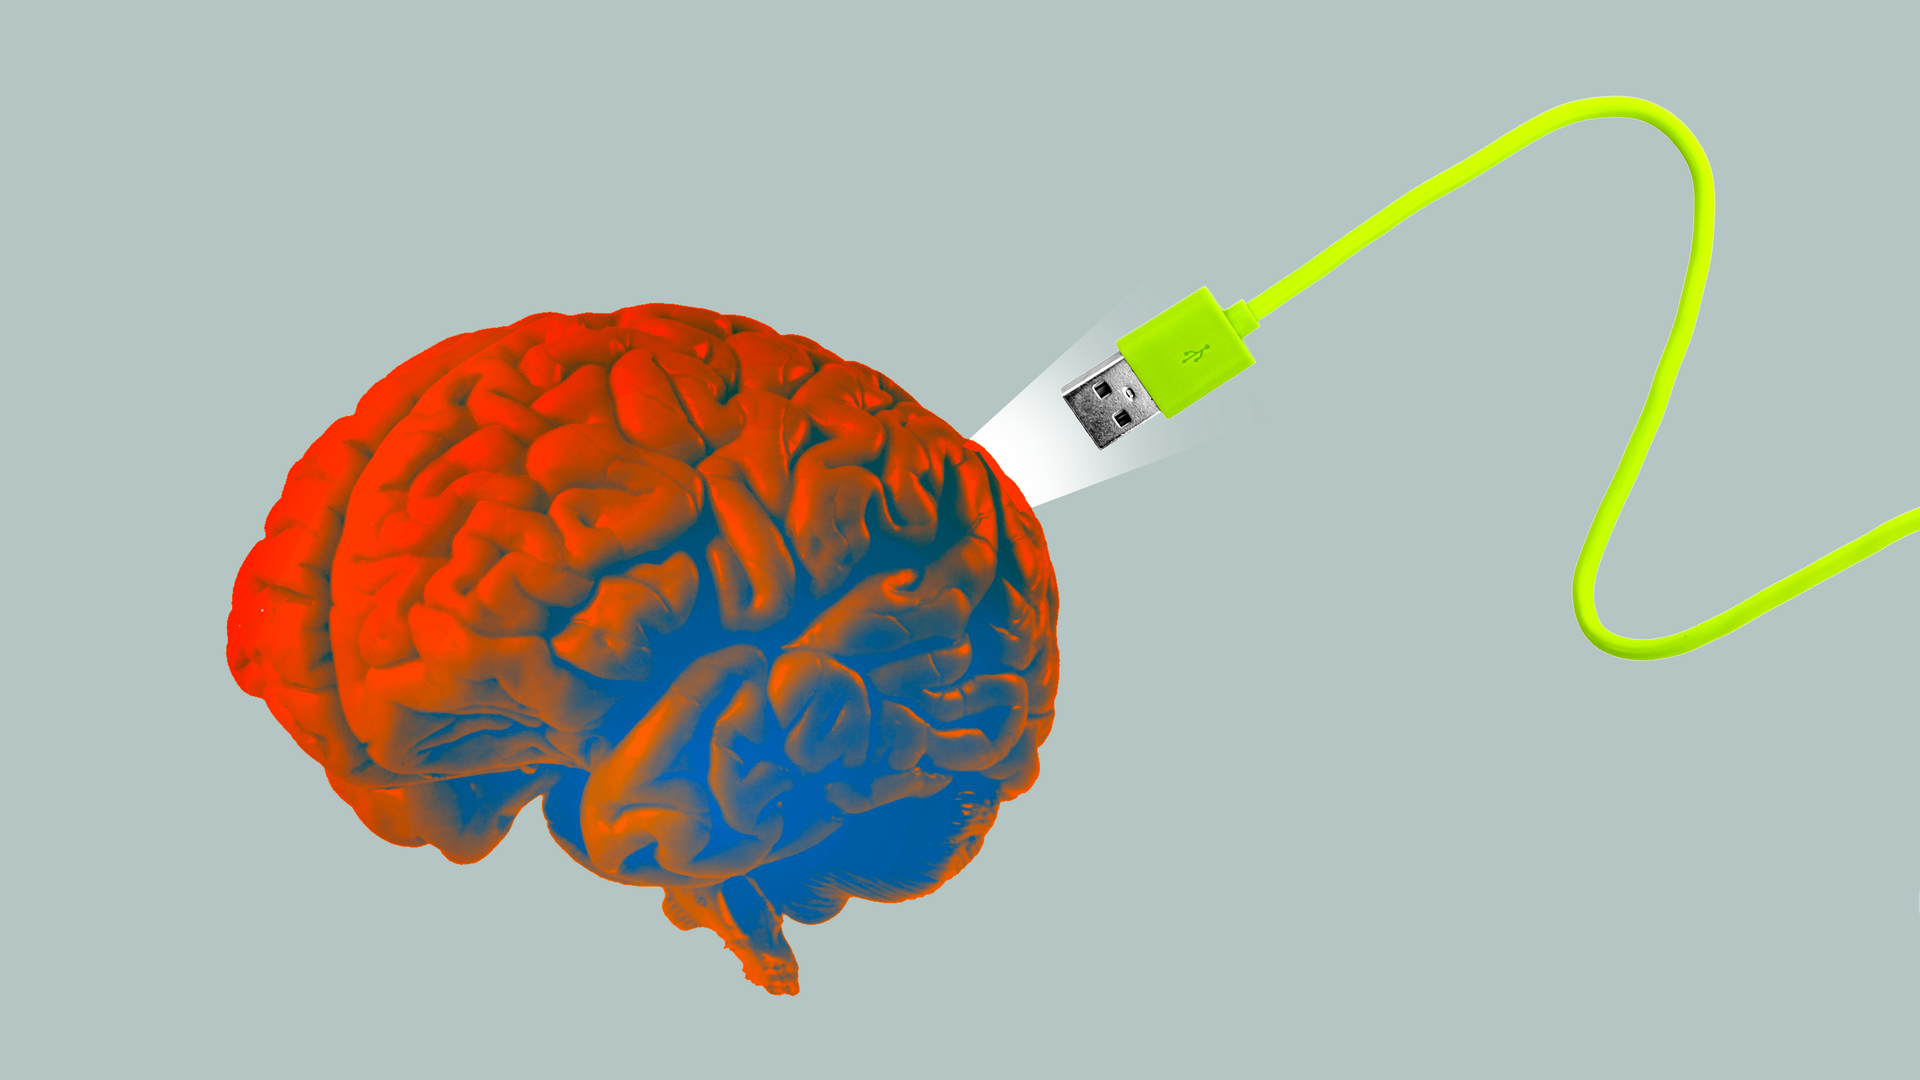 Illustration of a USB cord plugging into a brain